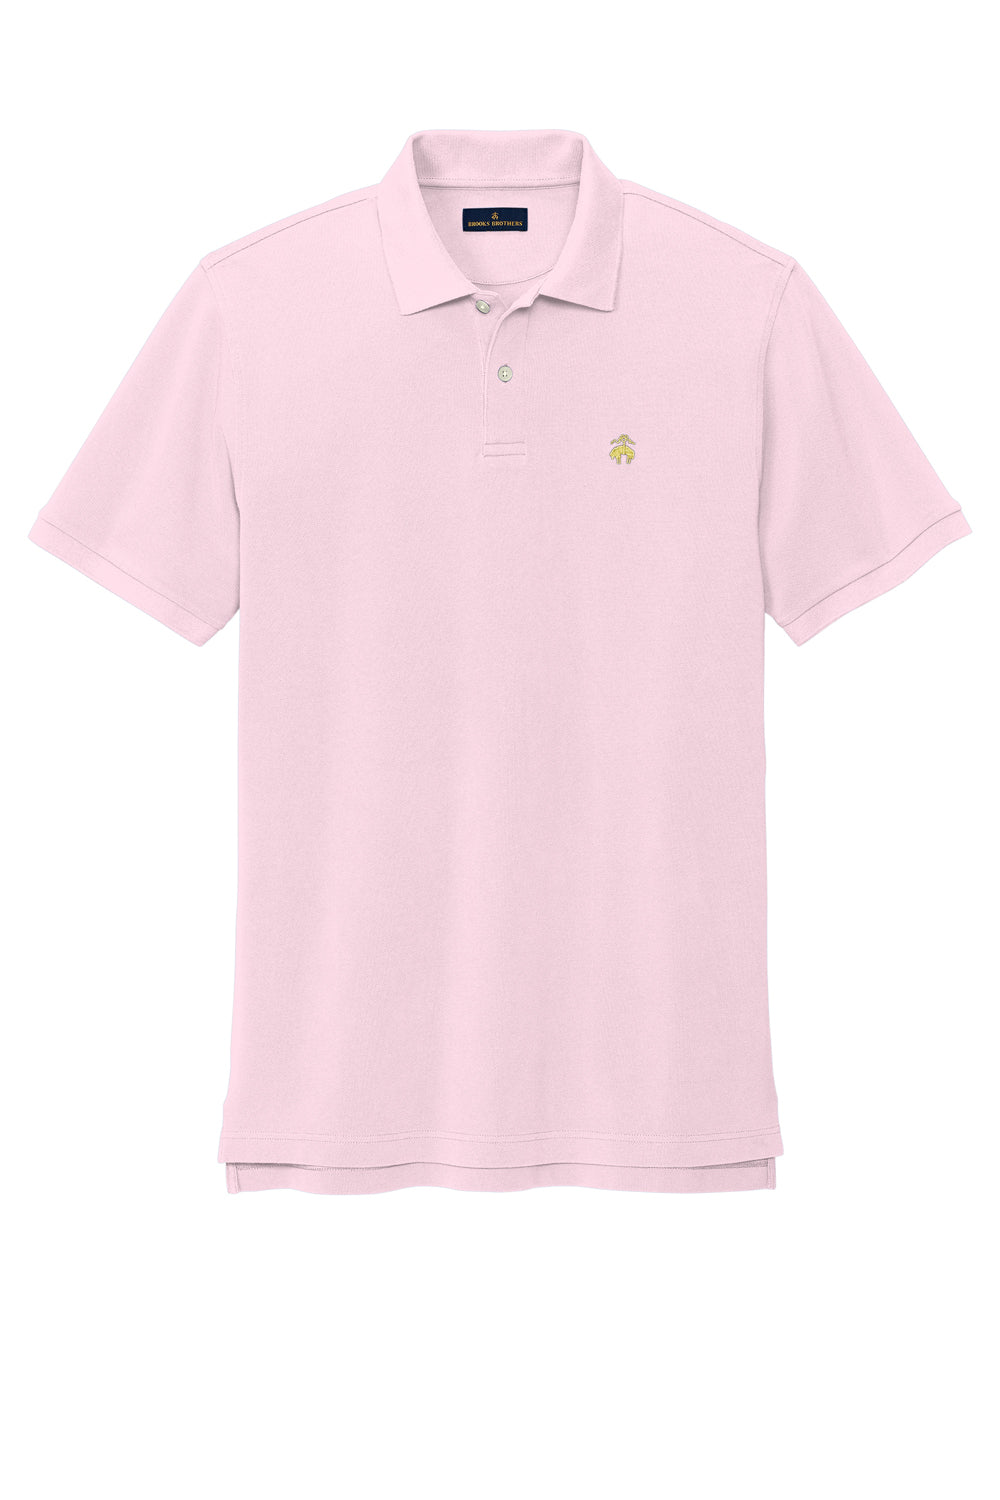 Brooks Brothers Mens Pique Short Sleeve Polo Shirt Pearl Pink Flat Front